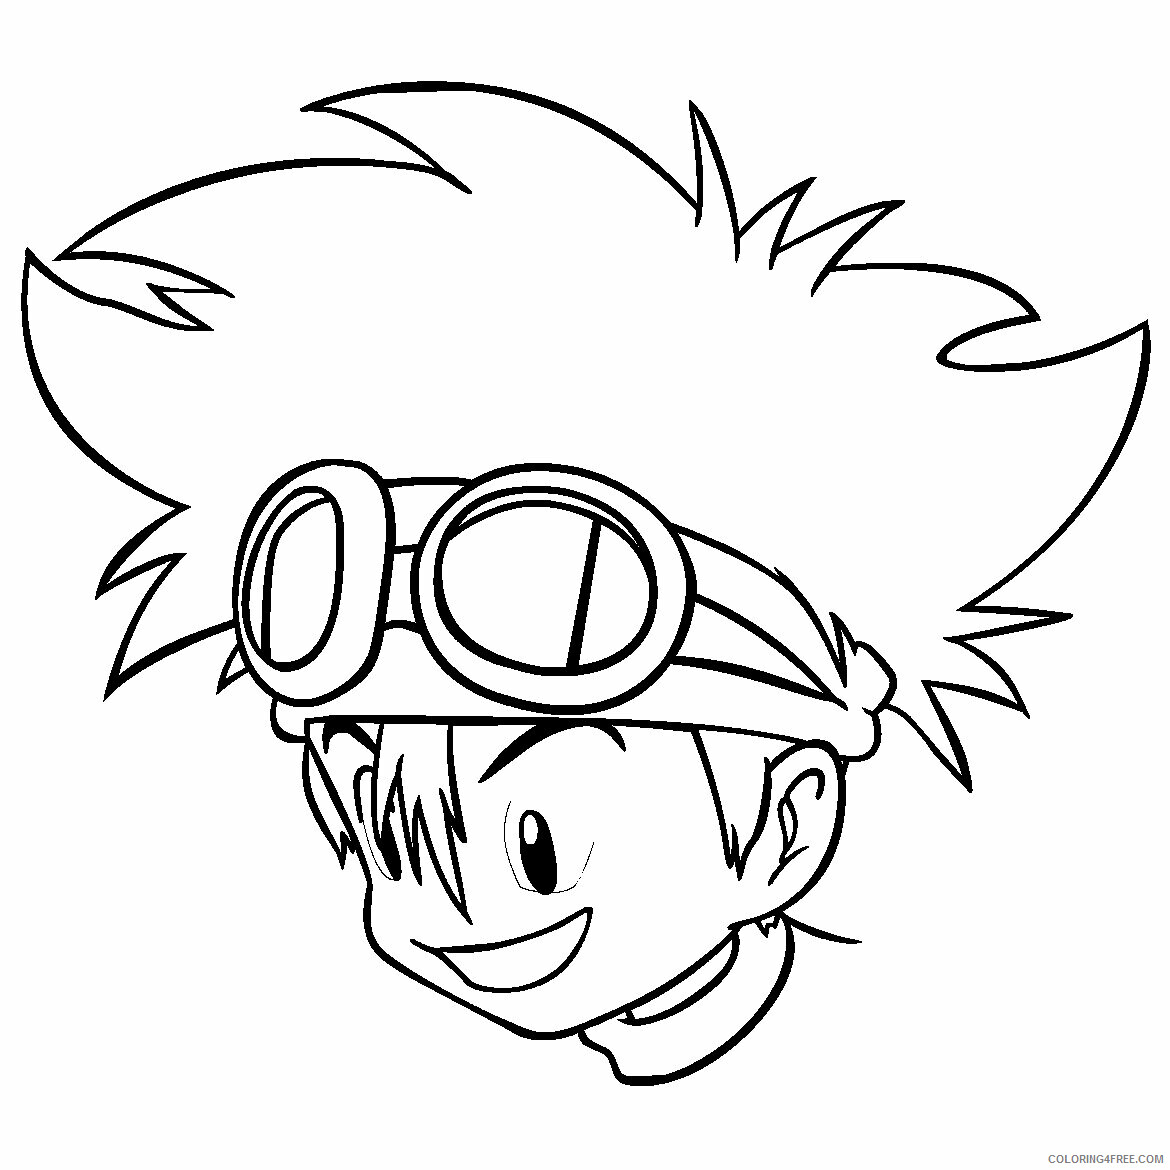 Digimon Printable Coloring Pages Anime digimon 8 2021 0376 Coloring4free